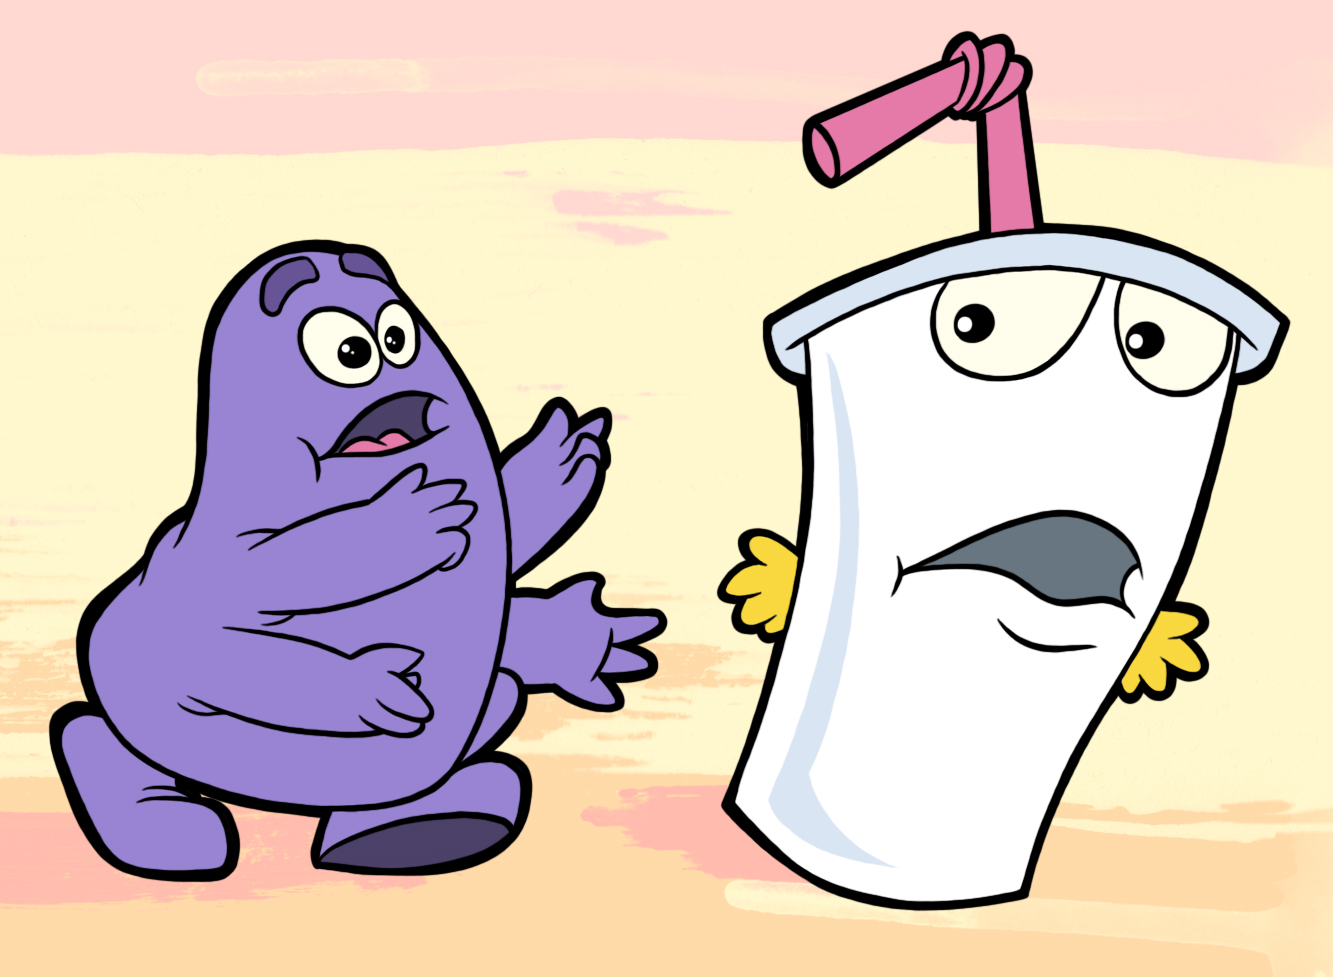 What are you drawing?: Grimace and Master Shake